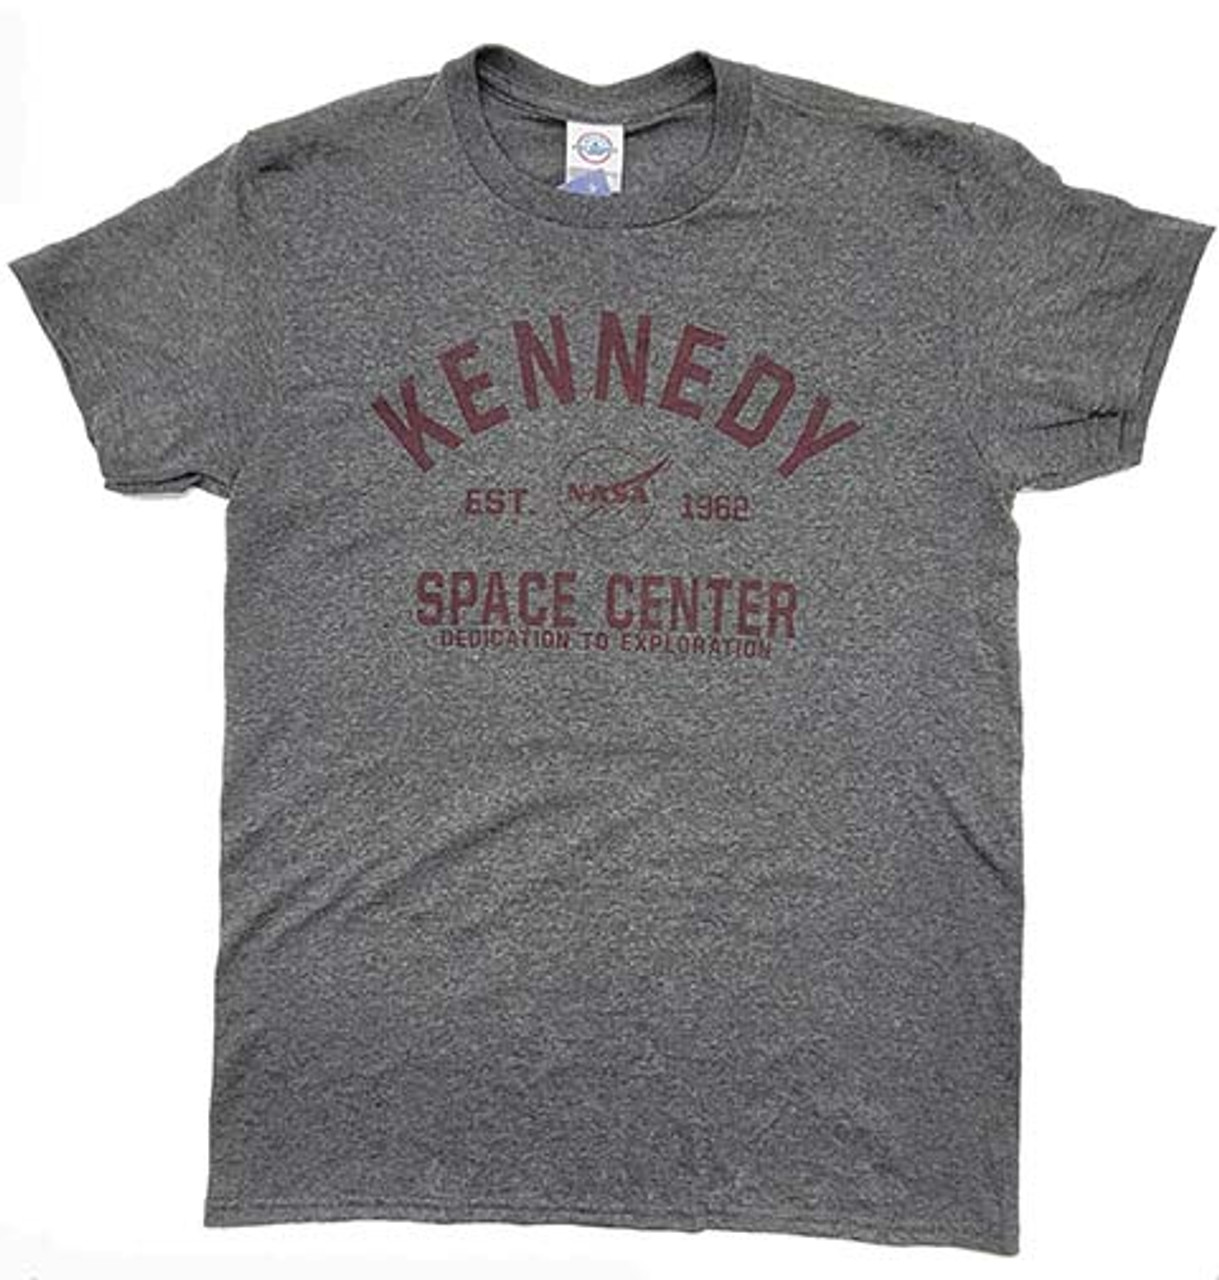 Kennedy Space Center Est. 1962 - Charcoal Tee